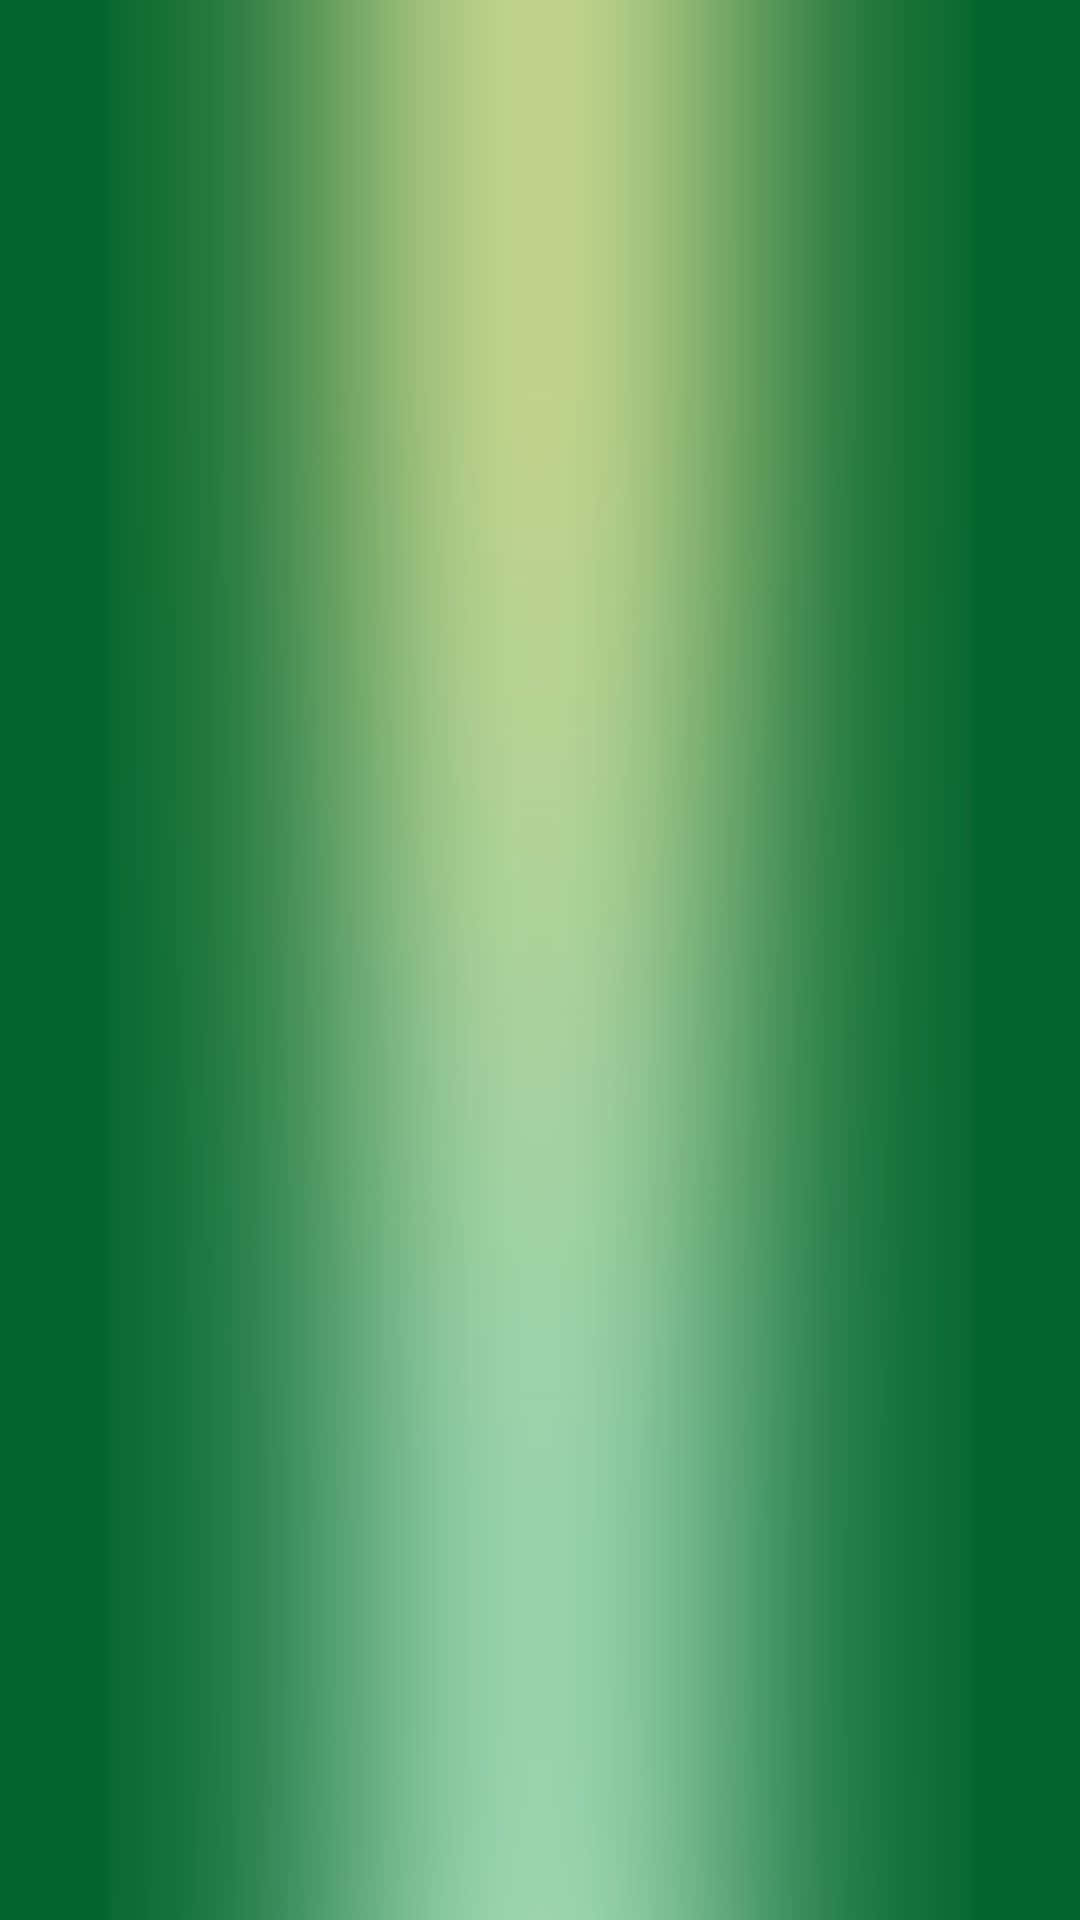 "Go Green with Green Gradient Background"